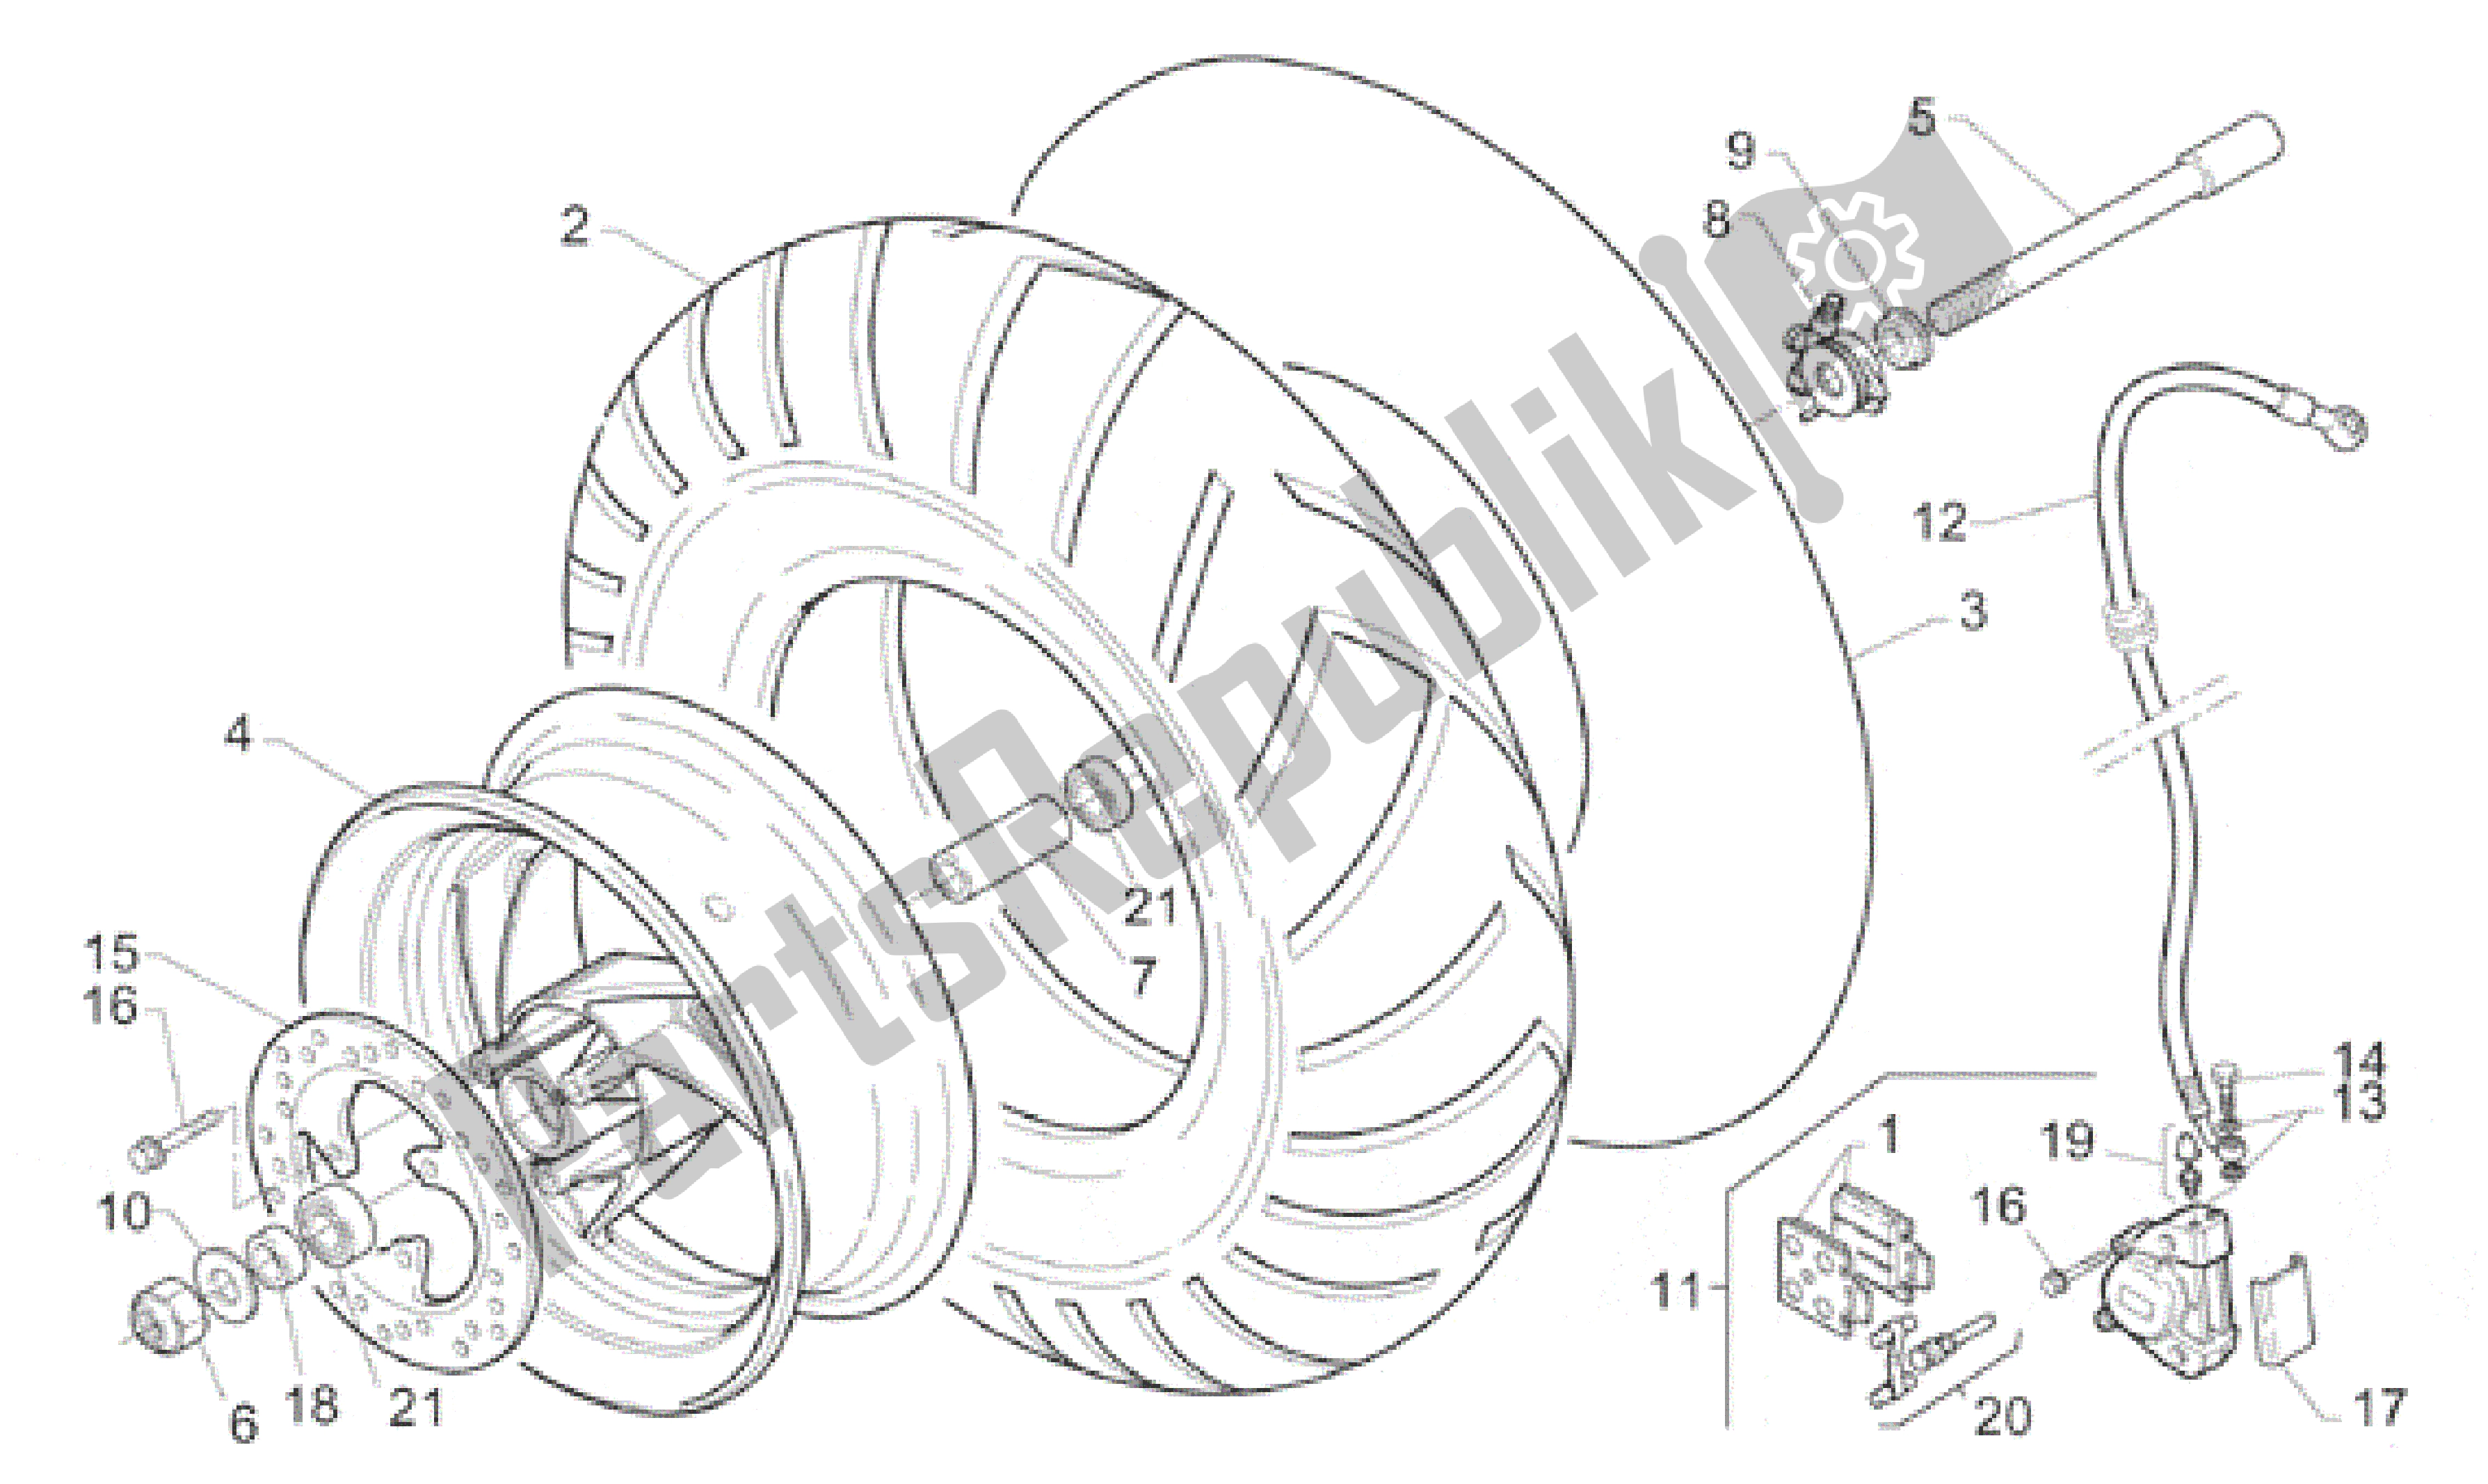 All parts for the Front Wheel of the Aprilia Gulliver 50 1996 - 1998